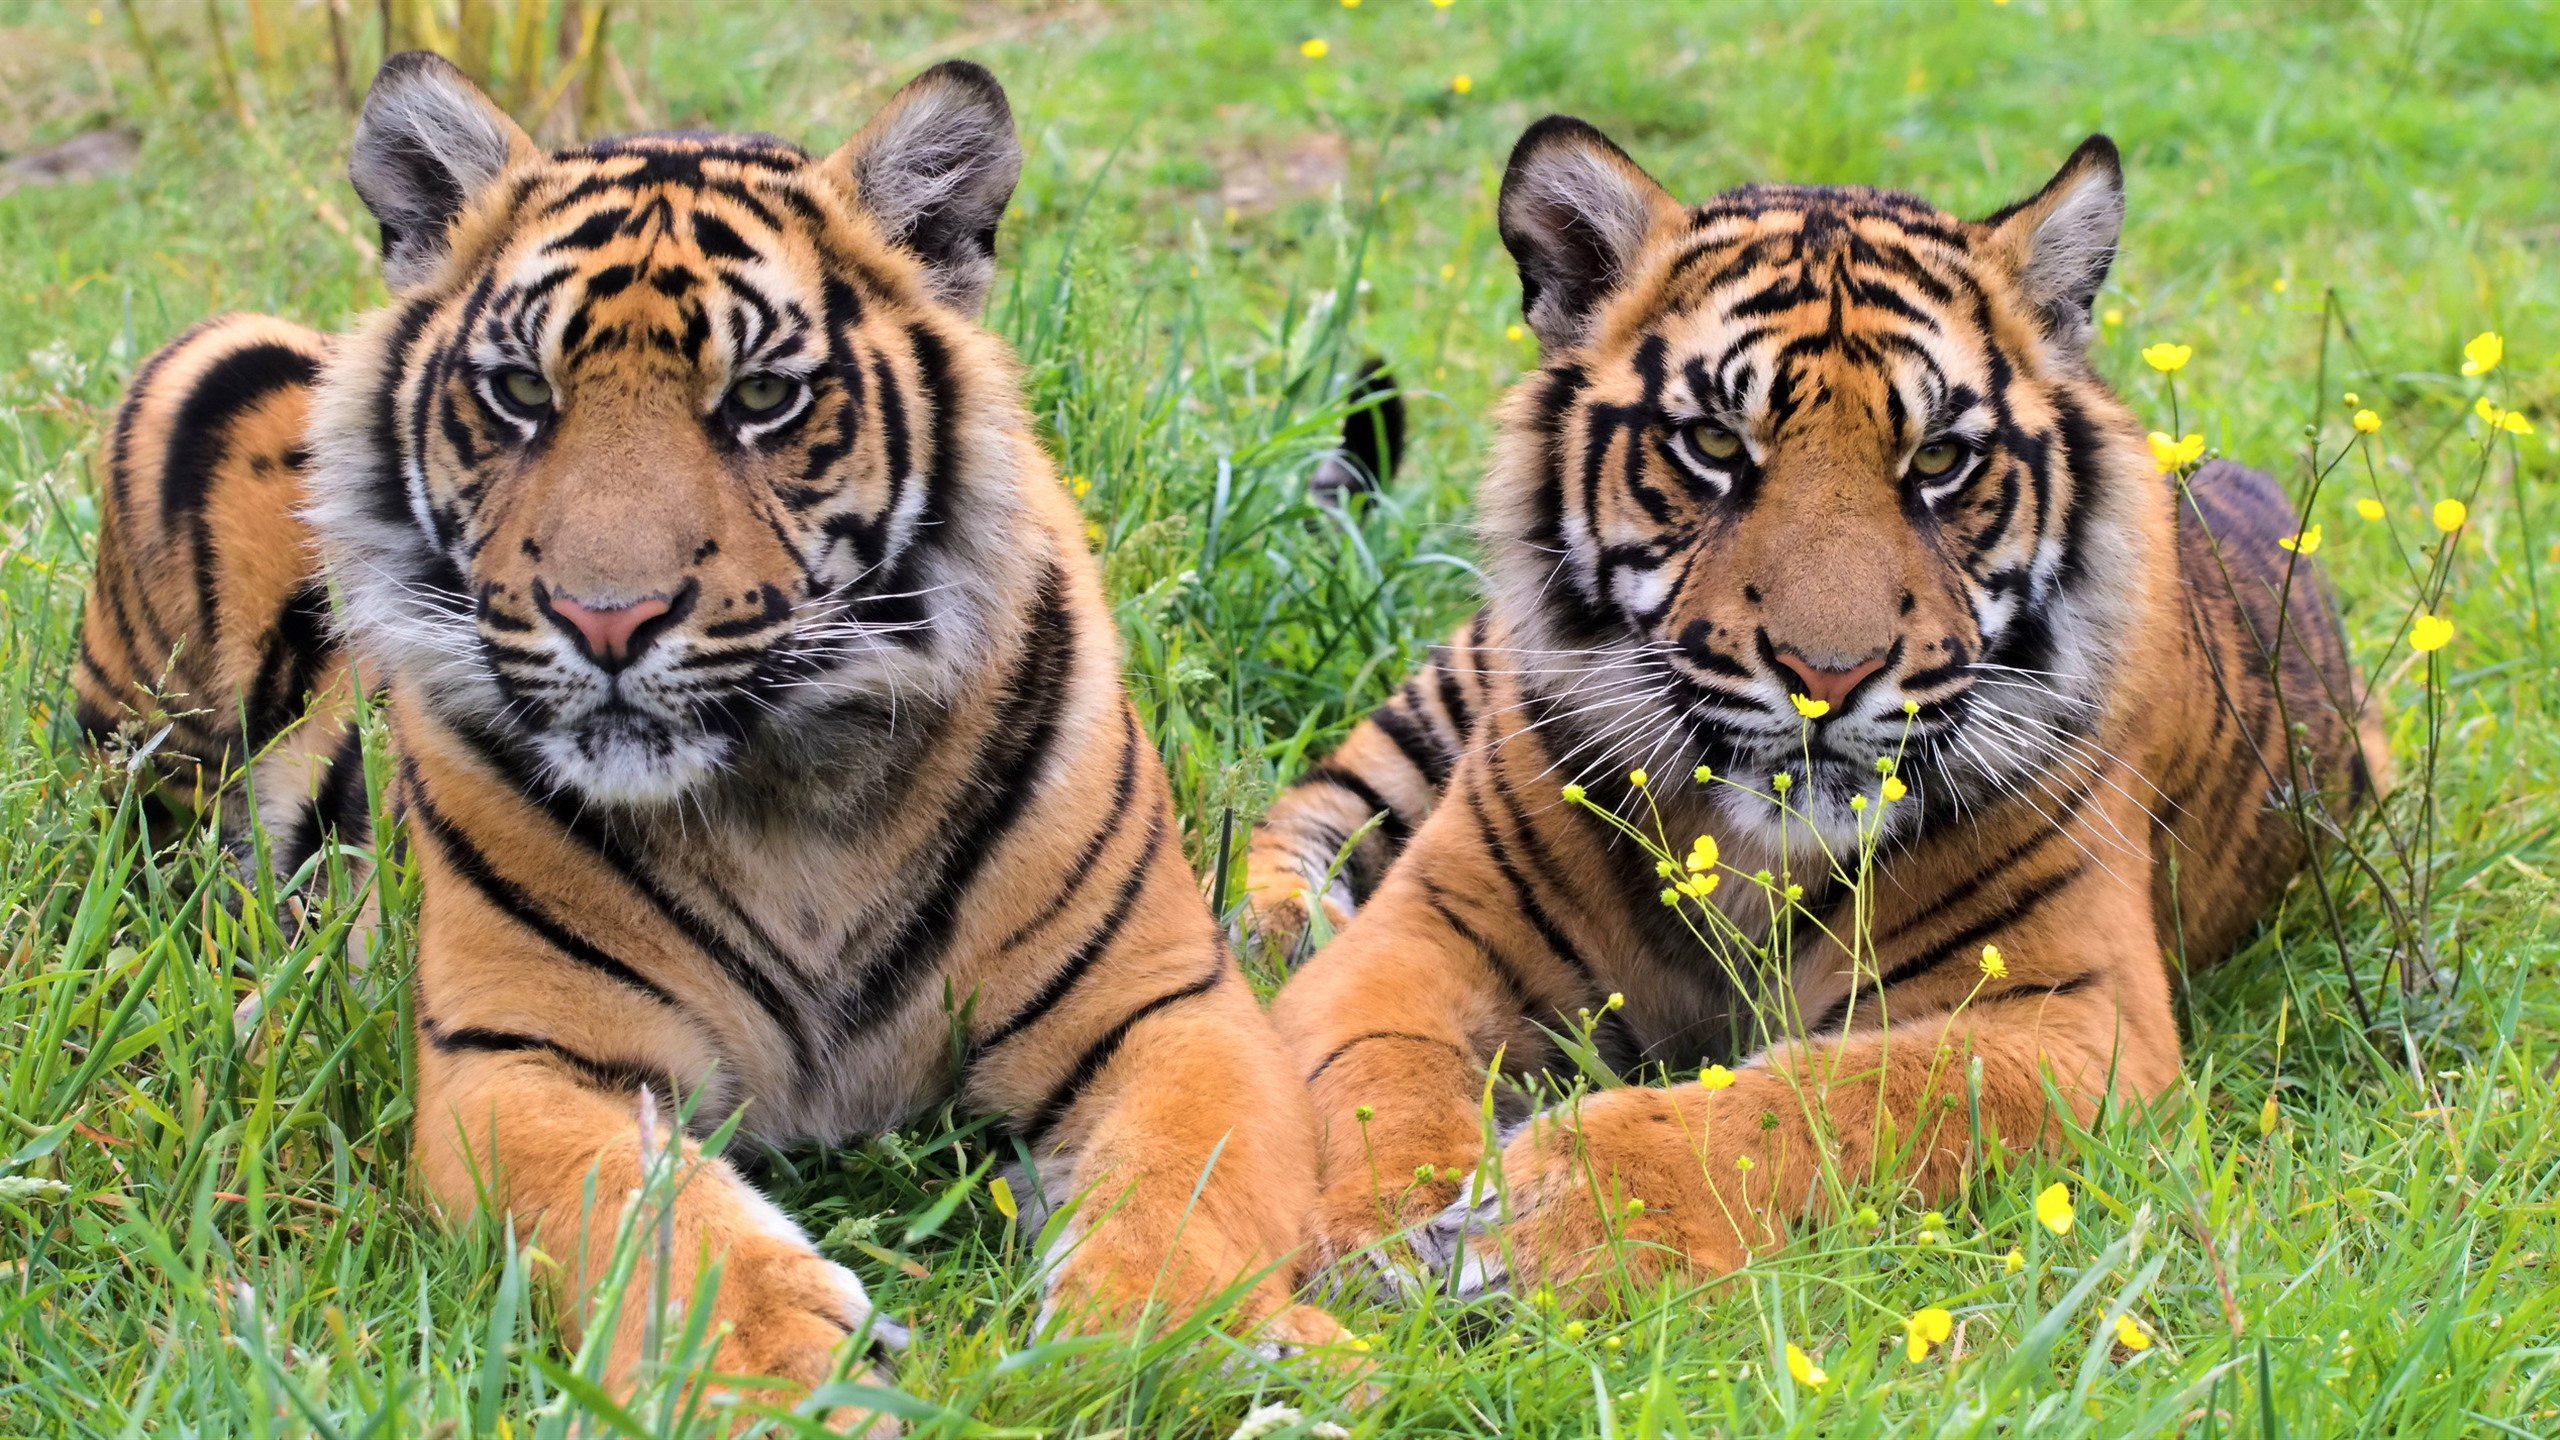 Two young tigers resting on green grass in a field